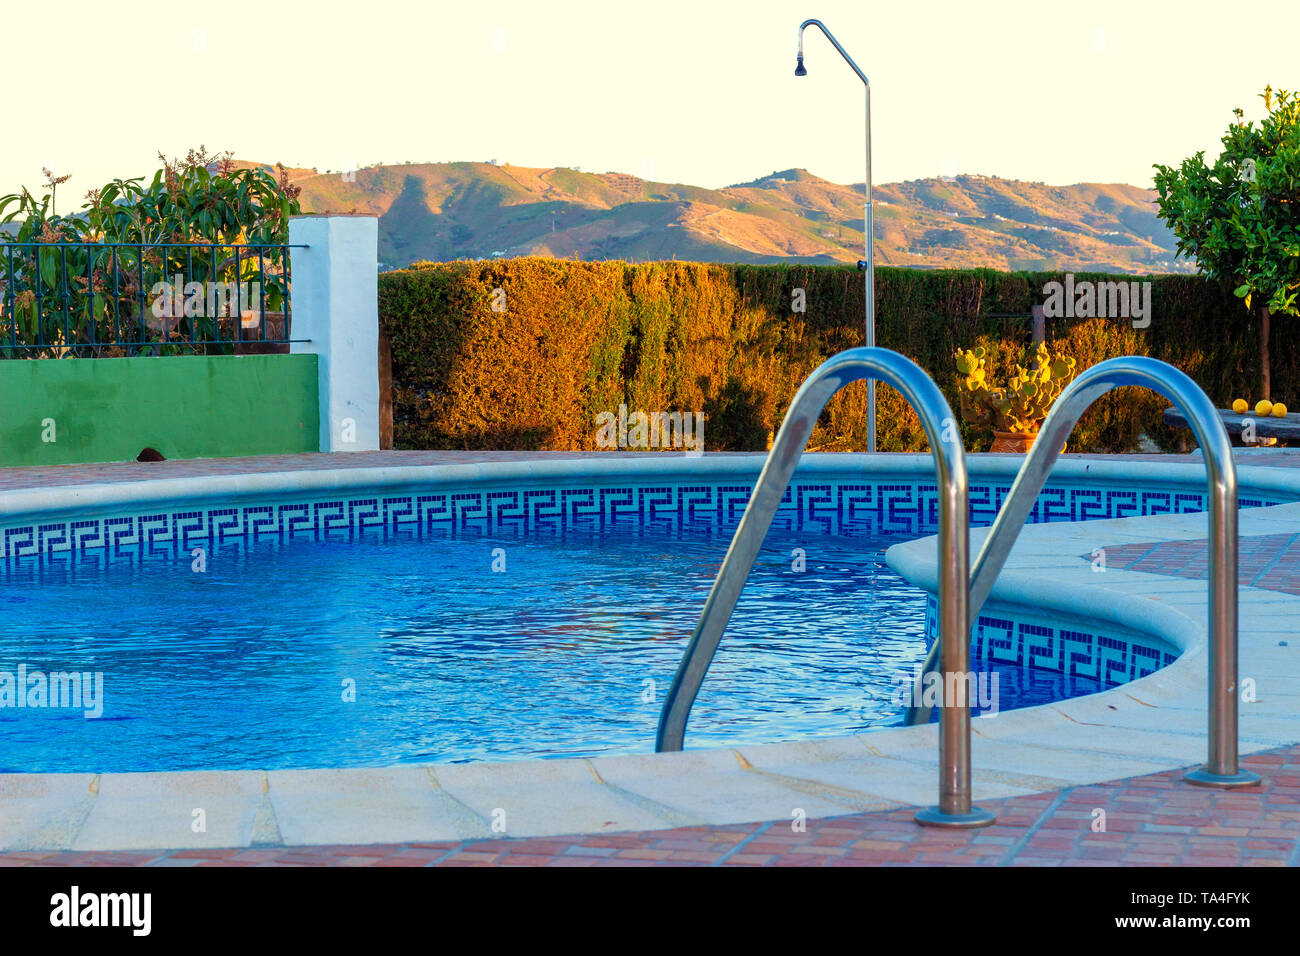 A luxury swimming pool set in an idyllic landscape surrounded by countryside and mountains in Malaga, Spain Stock Photo